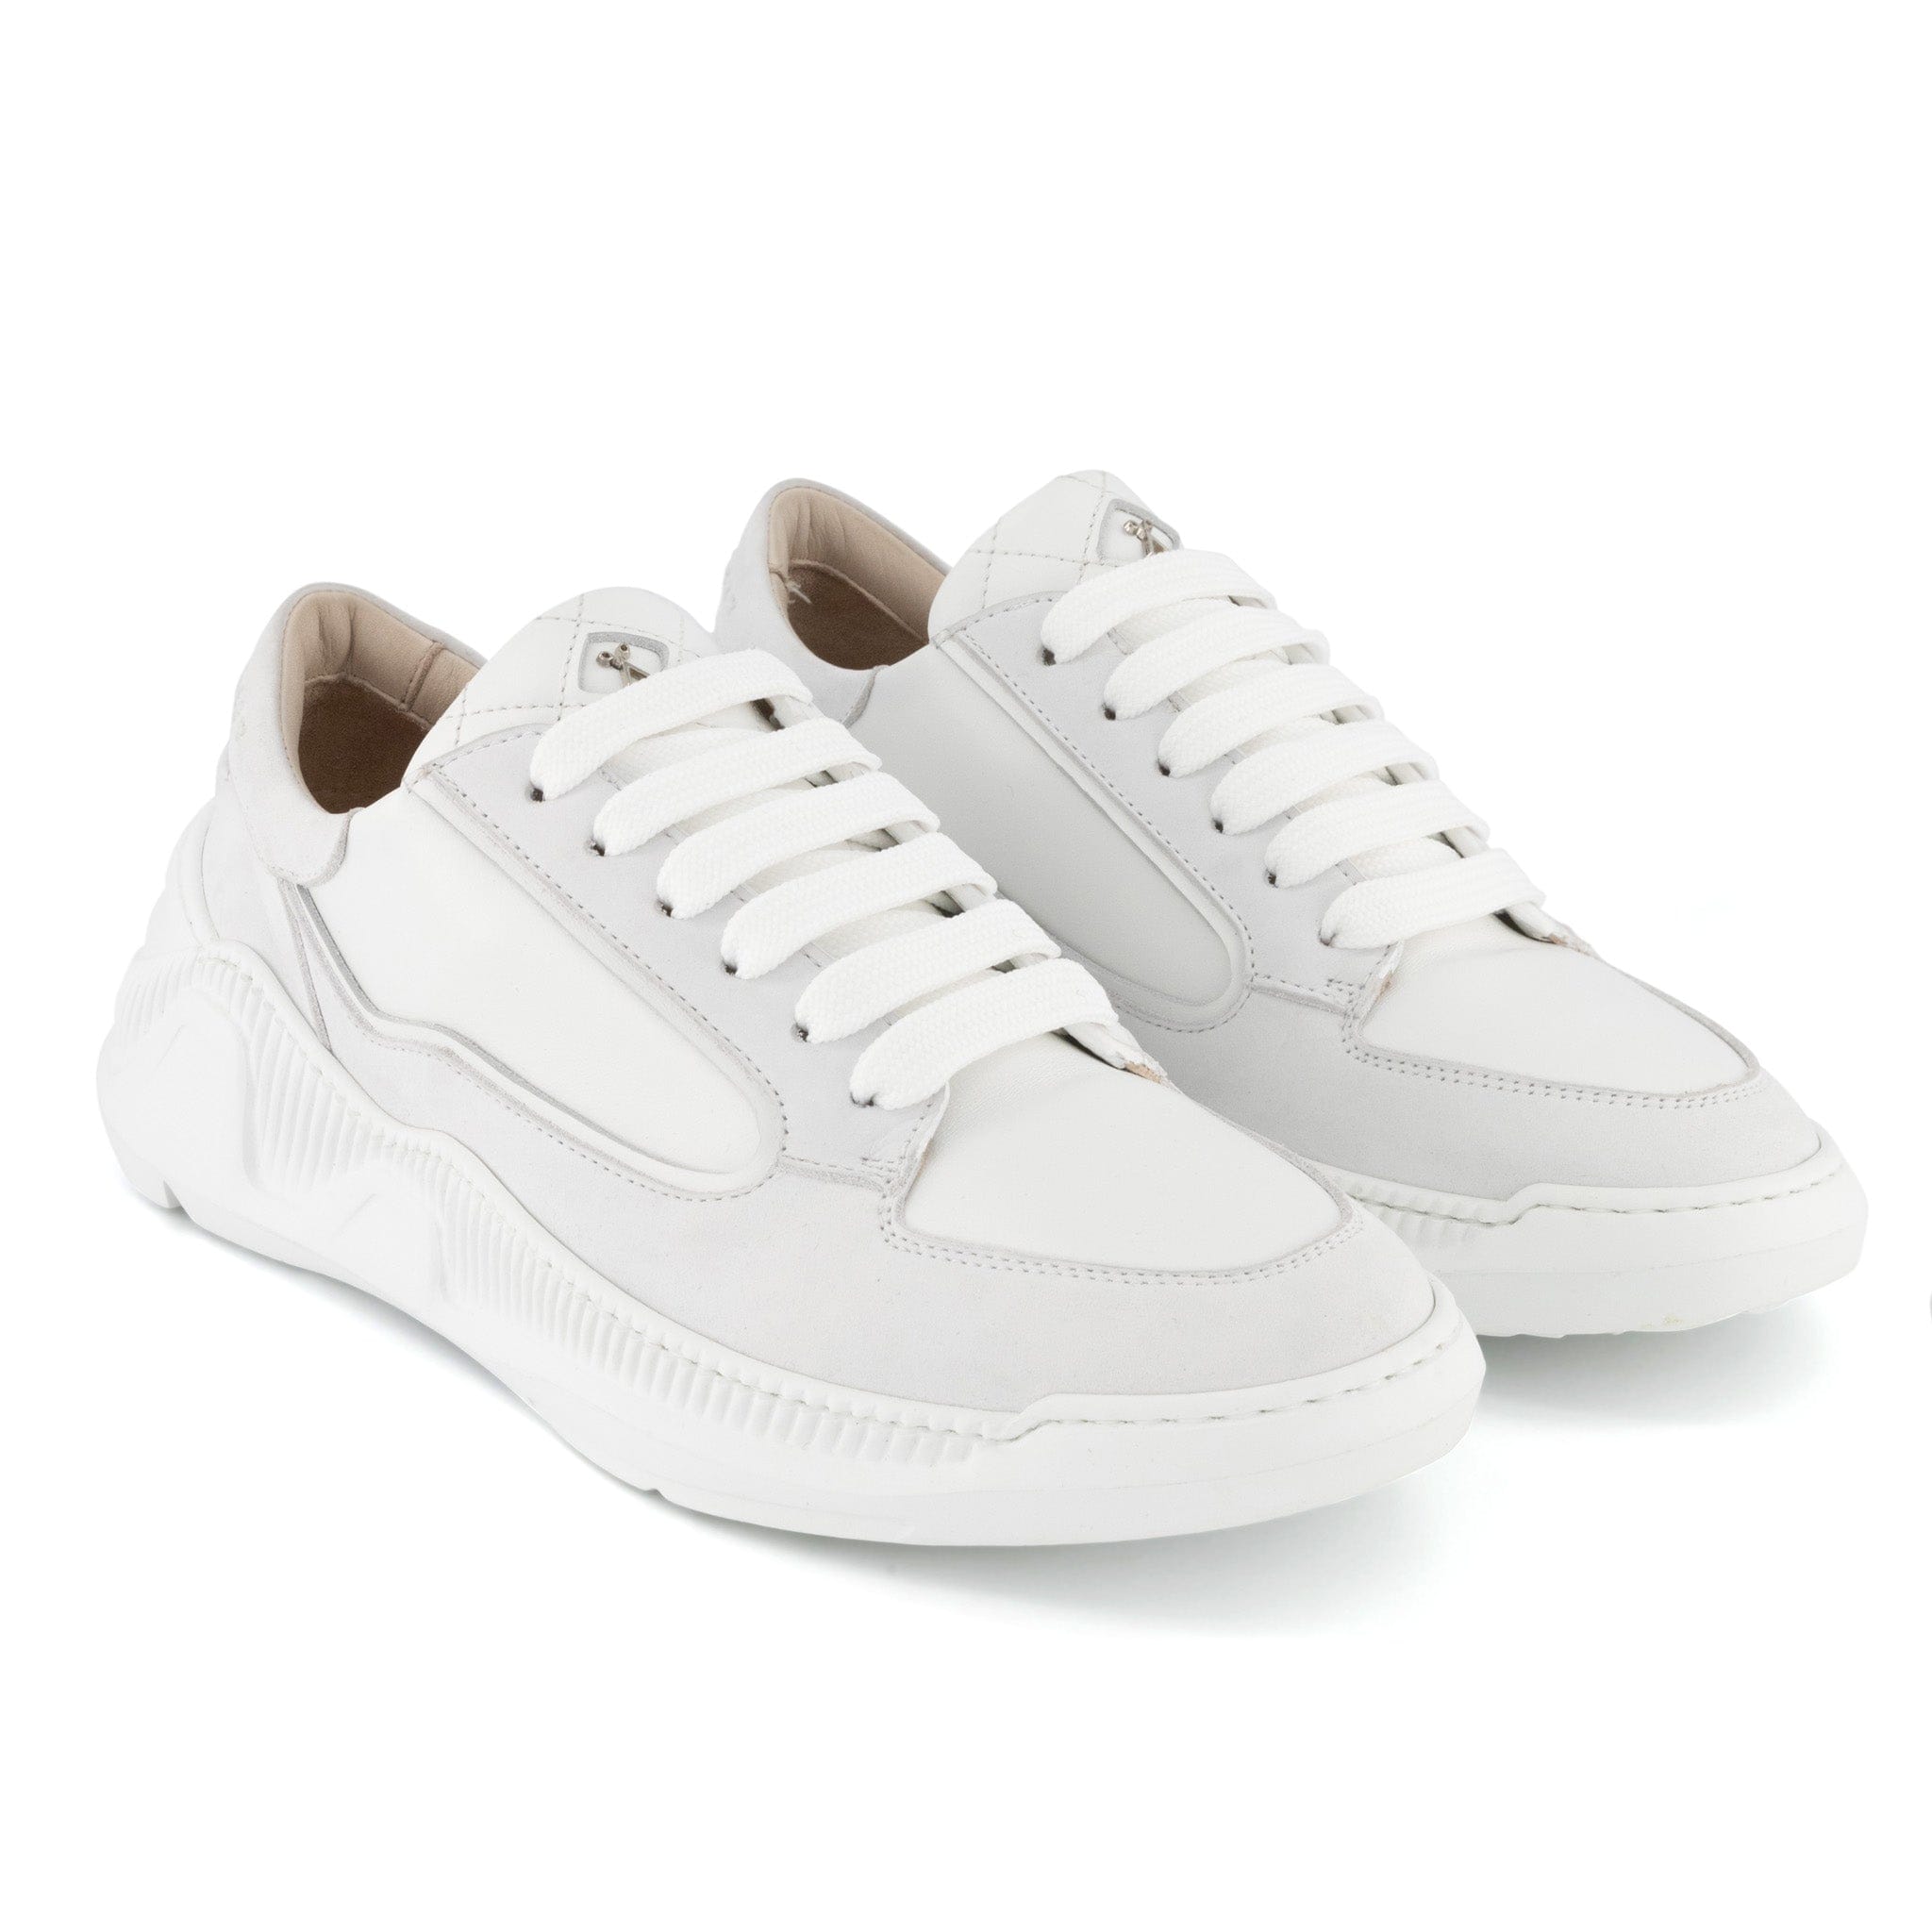 Nesto Low Top Italian Leather Sneaker | All White | White Outsole | Made in Italy